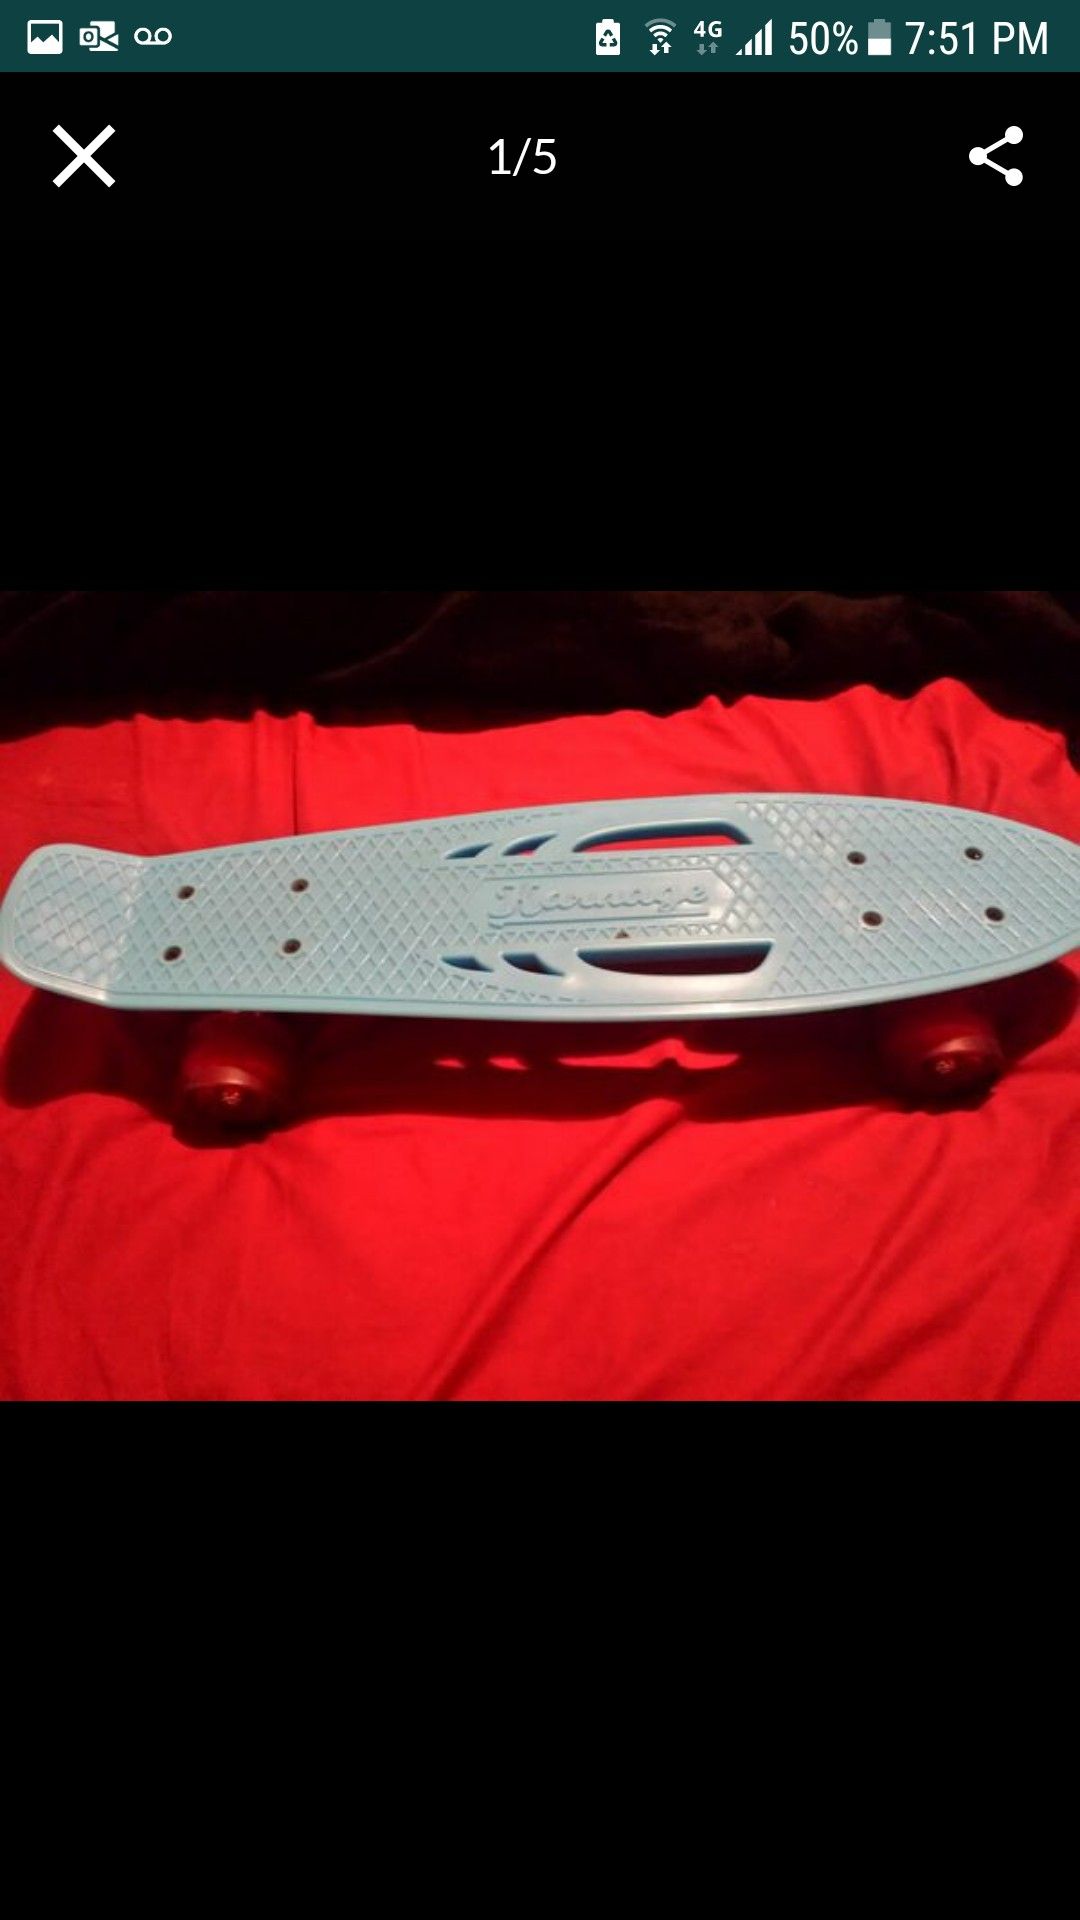 Karnage Skateboard with Cutout Handle available in SPRING, TX